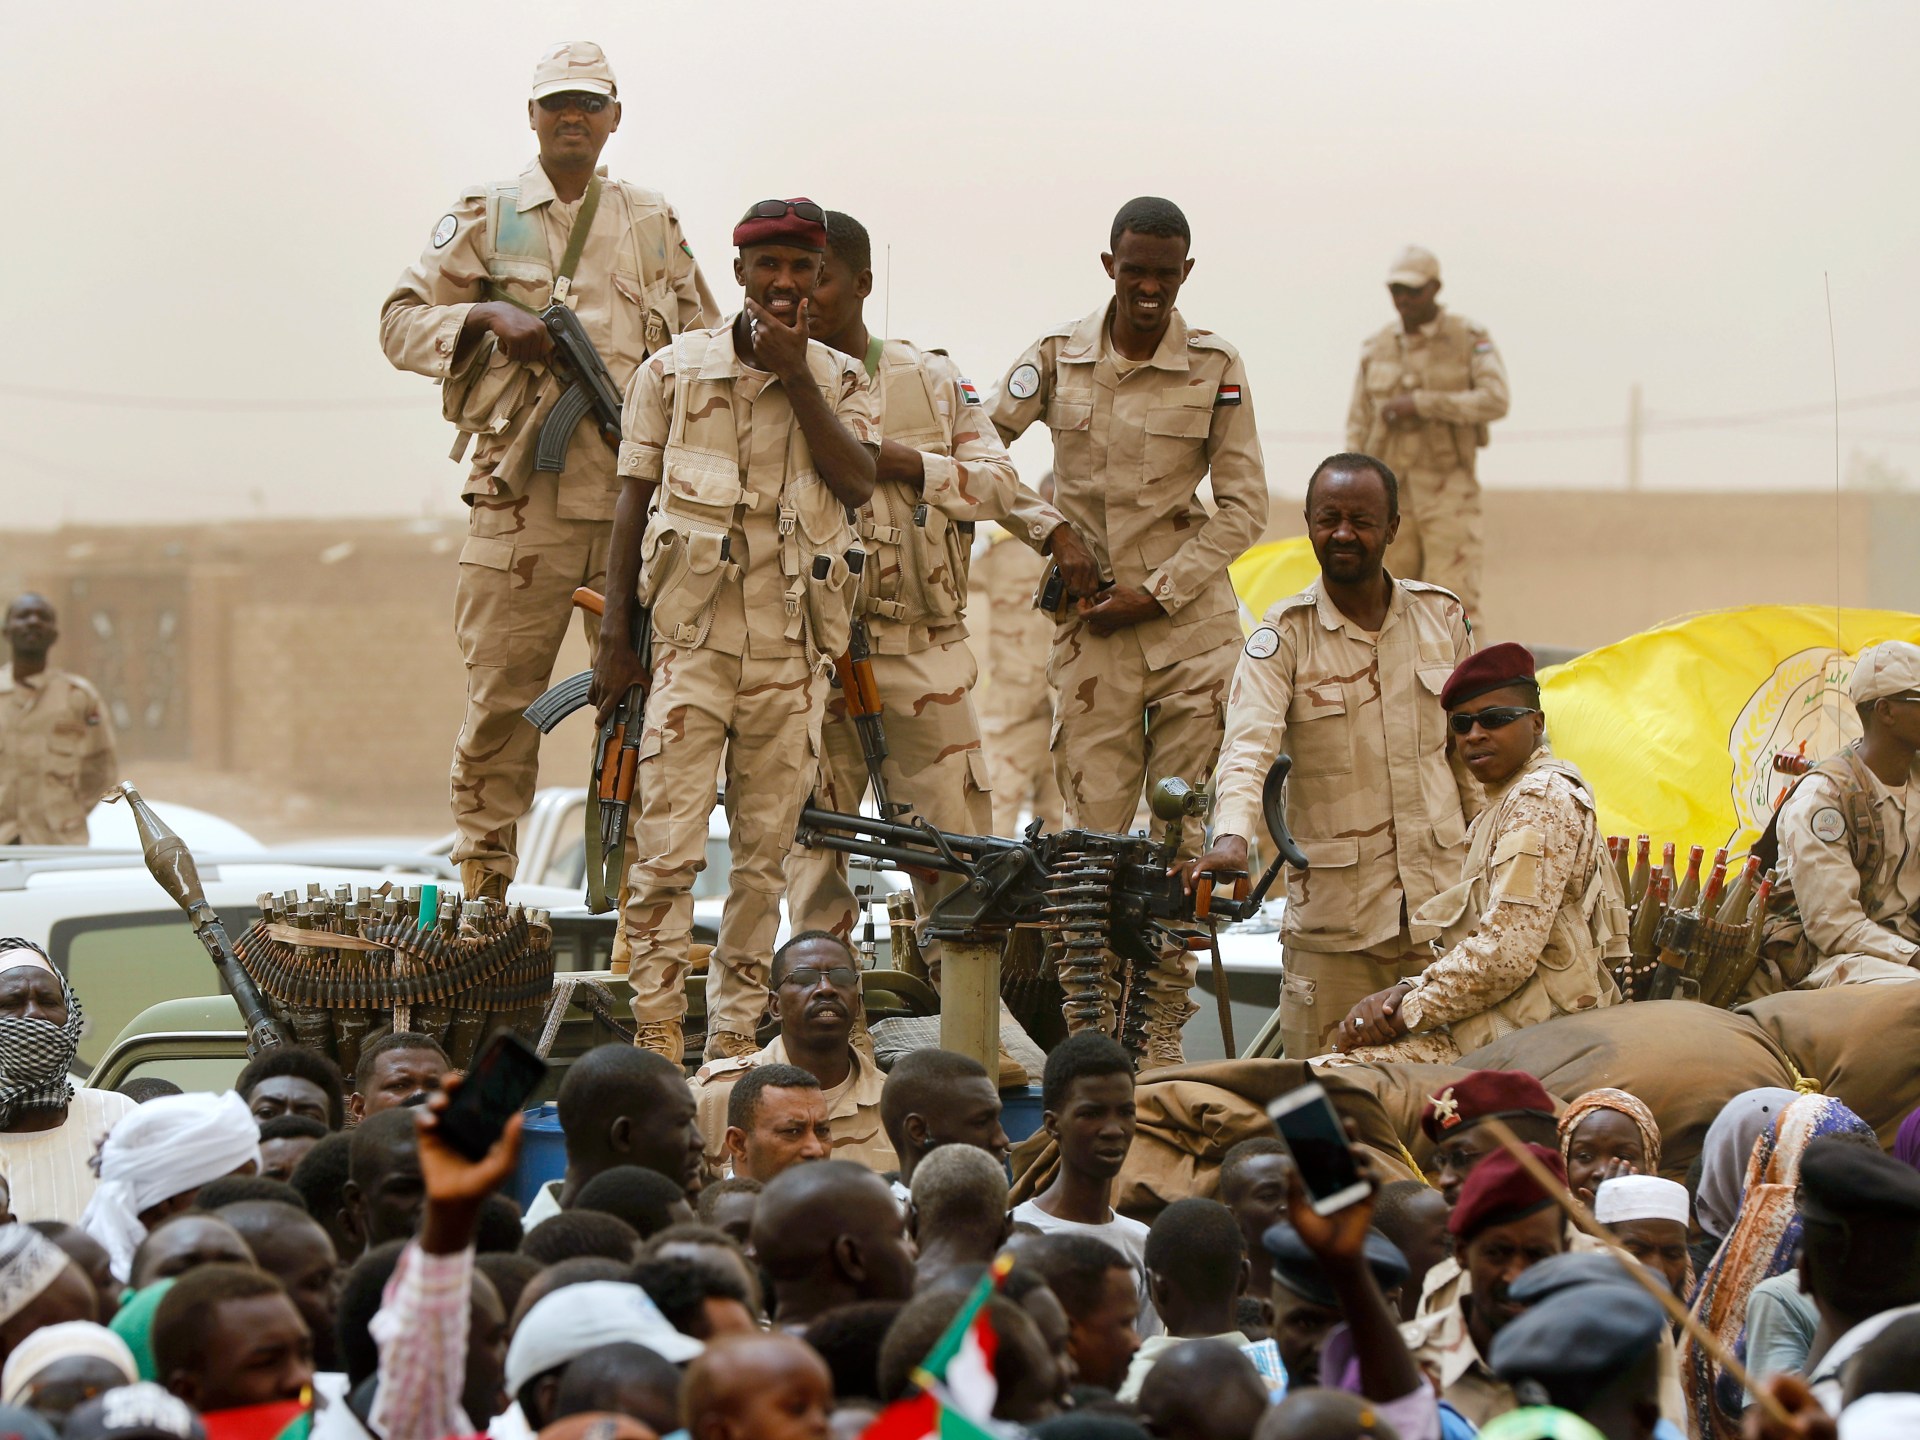 EU sanctions six companies accused of ‘undermining stability’ in Sudan | Conflict News